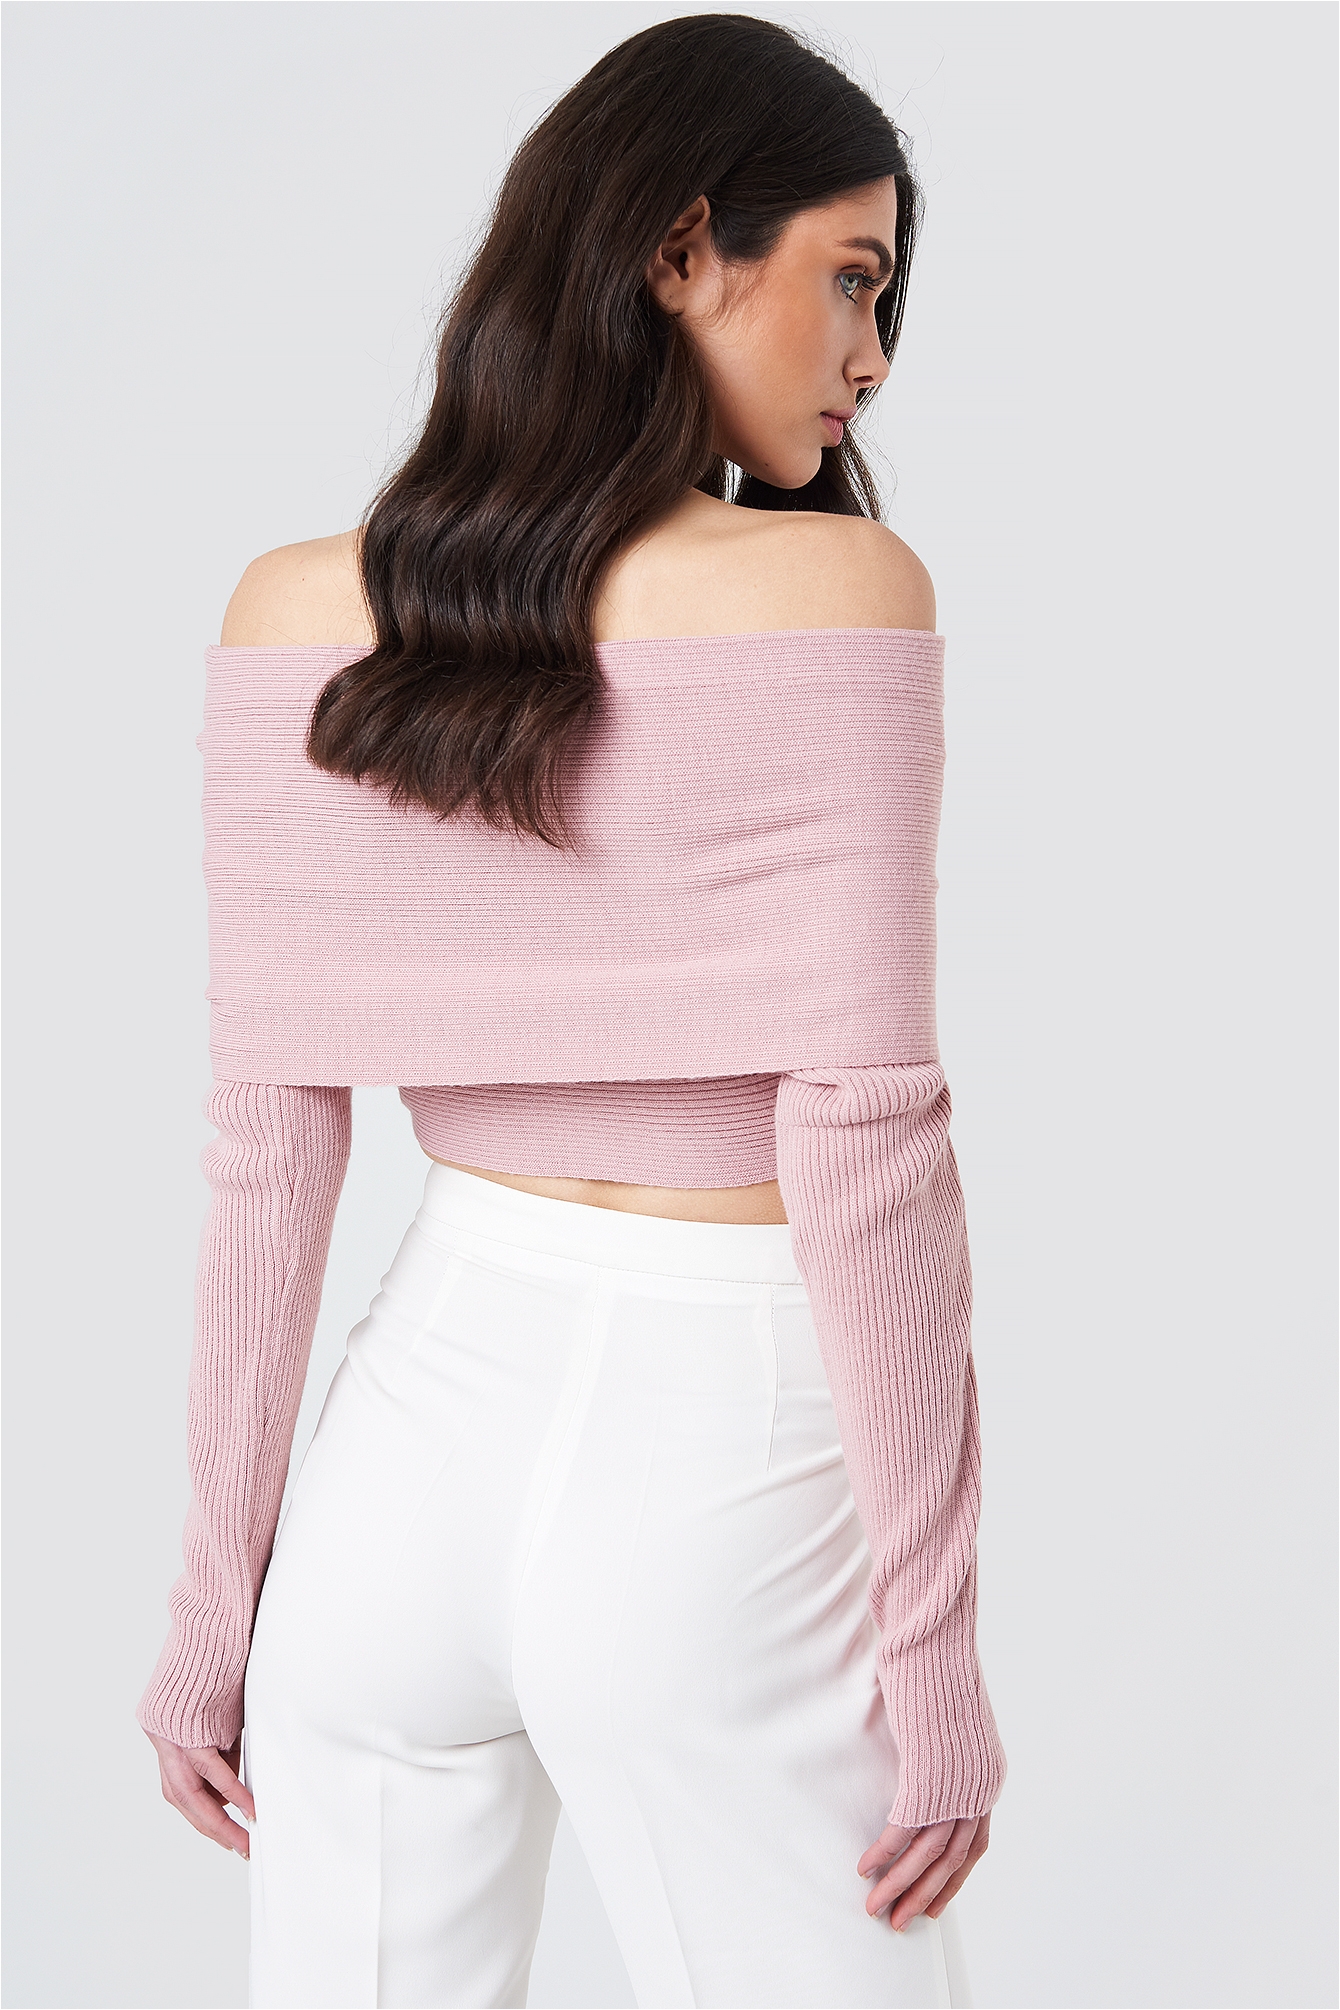 nakd cropped folded knitted sweater 1018 001111 0115 02b r